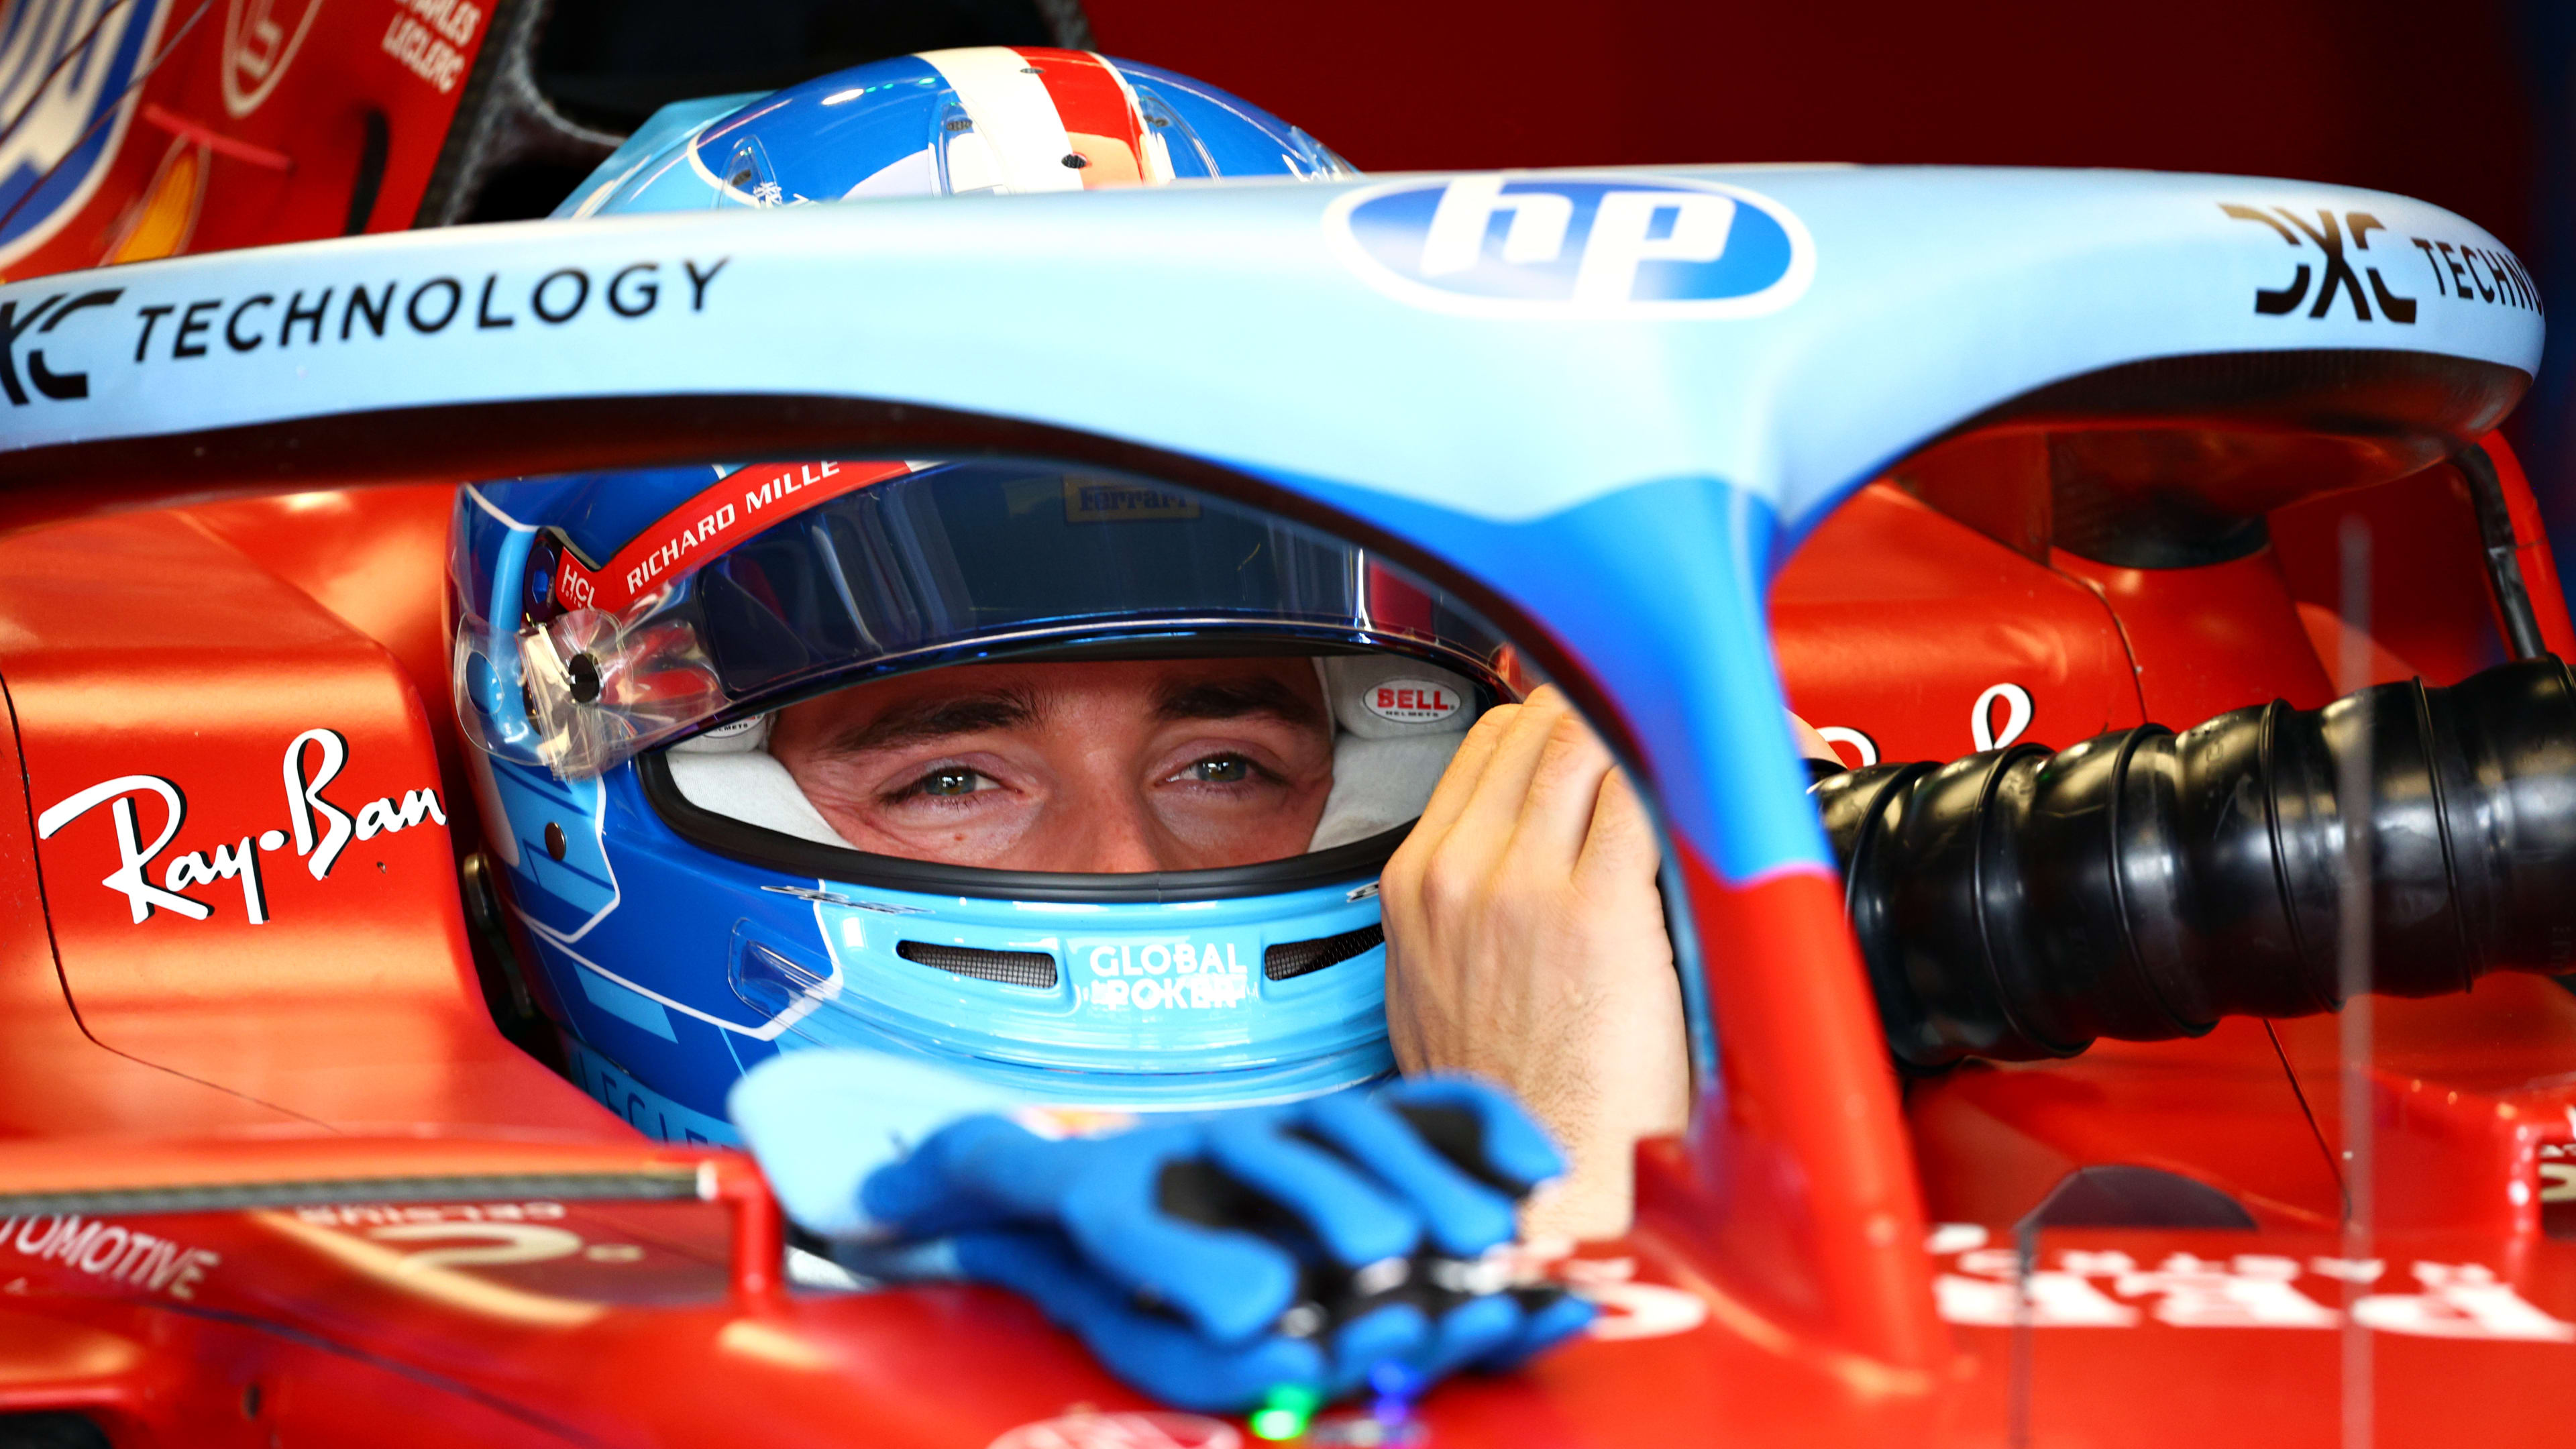 MIAMI, FLORIDA - MAY 03: Charles Leclerc of Monaco and Ferrari prepares to drive in the garage